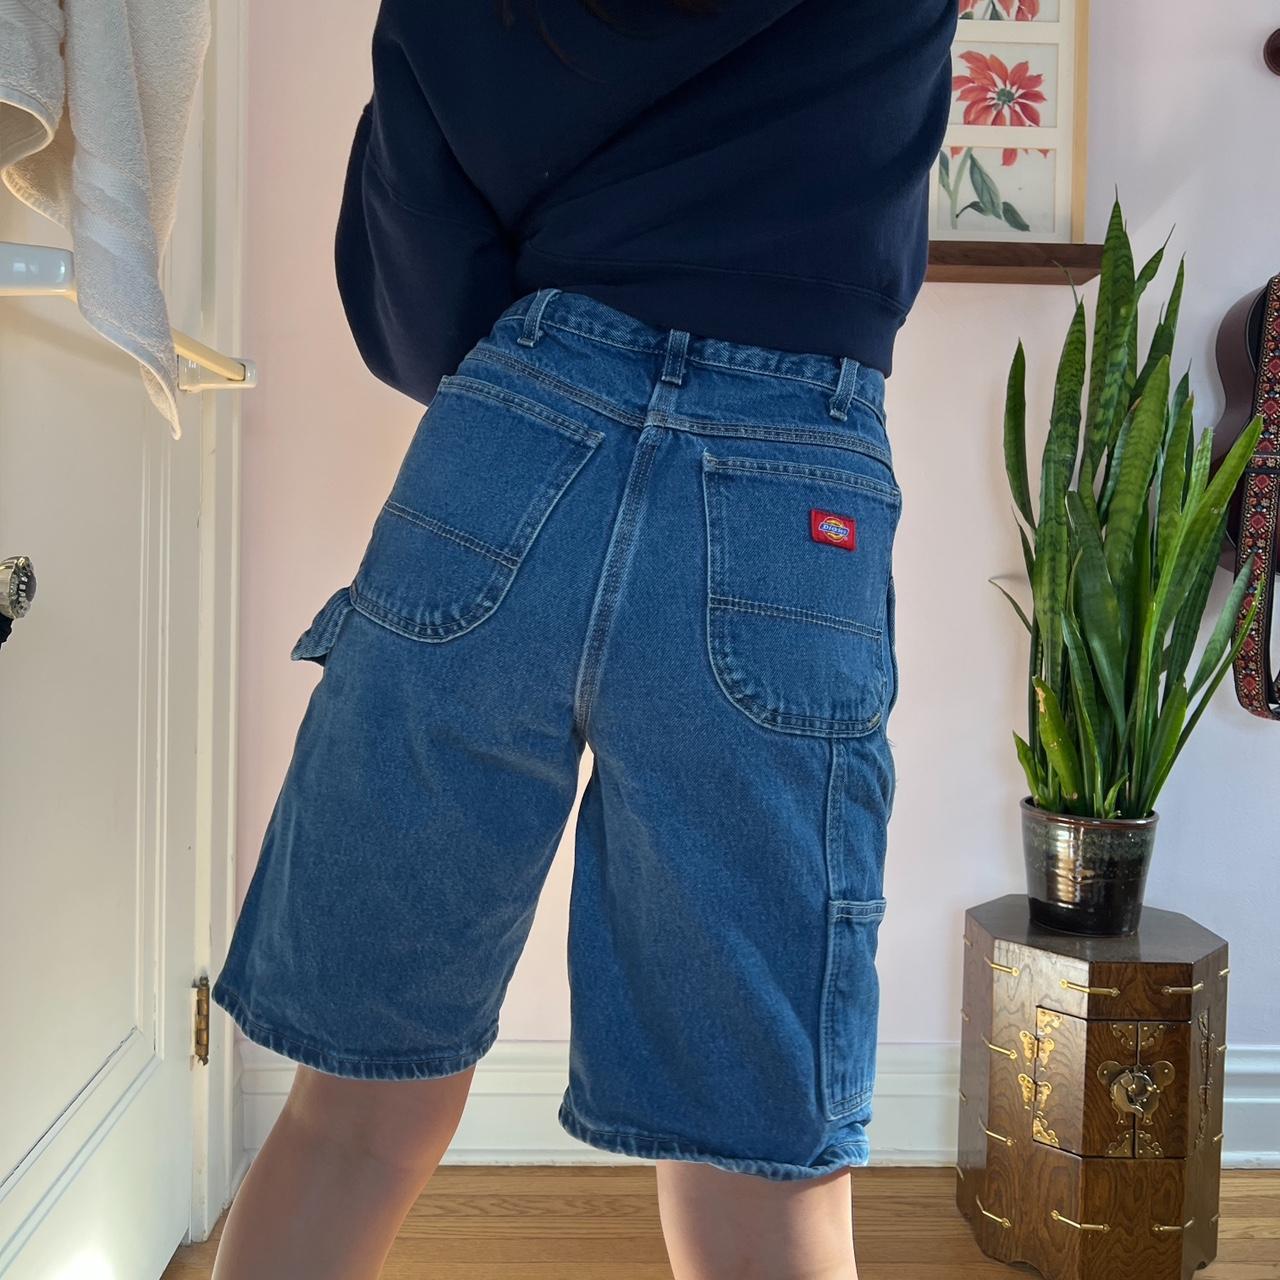 Dickies Women's Blue and Navy Shorts | Depop